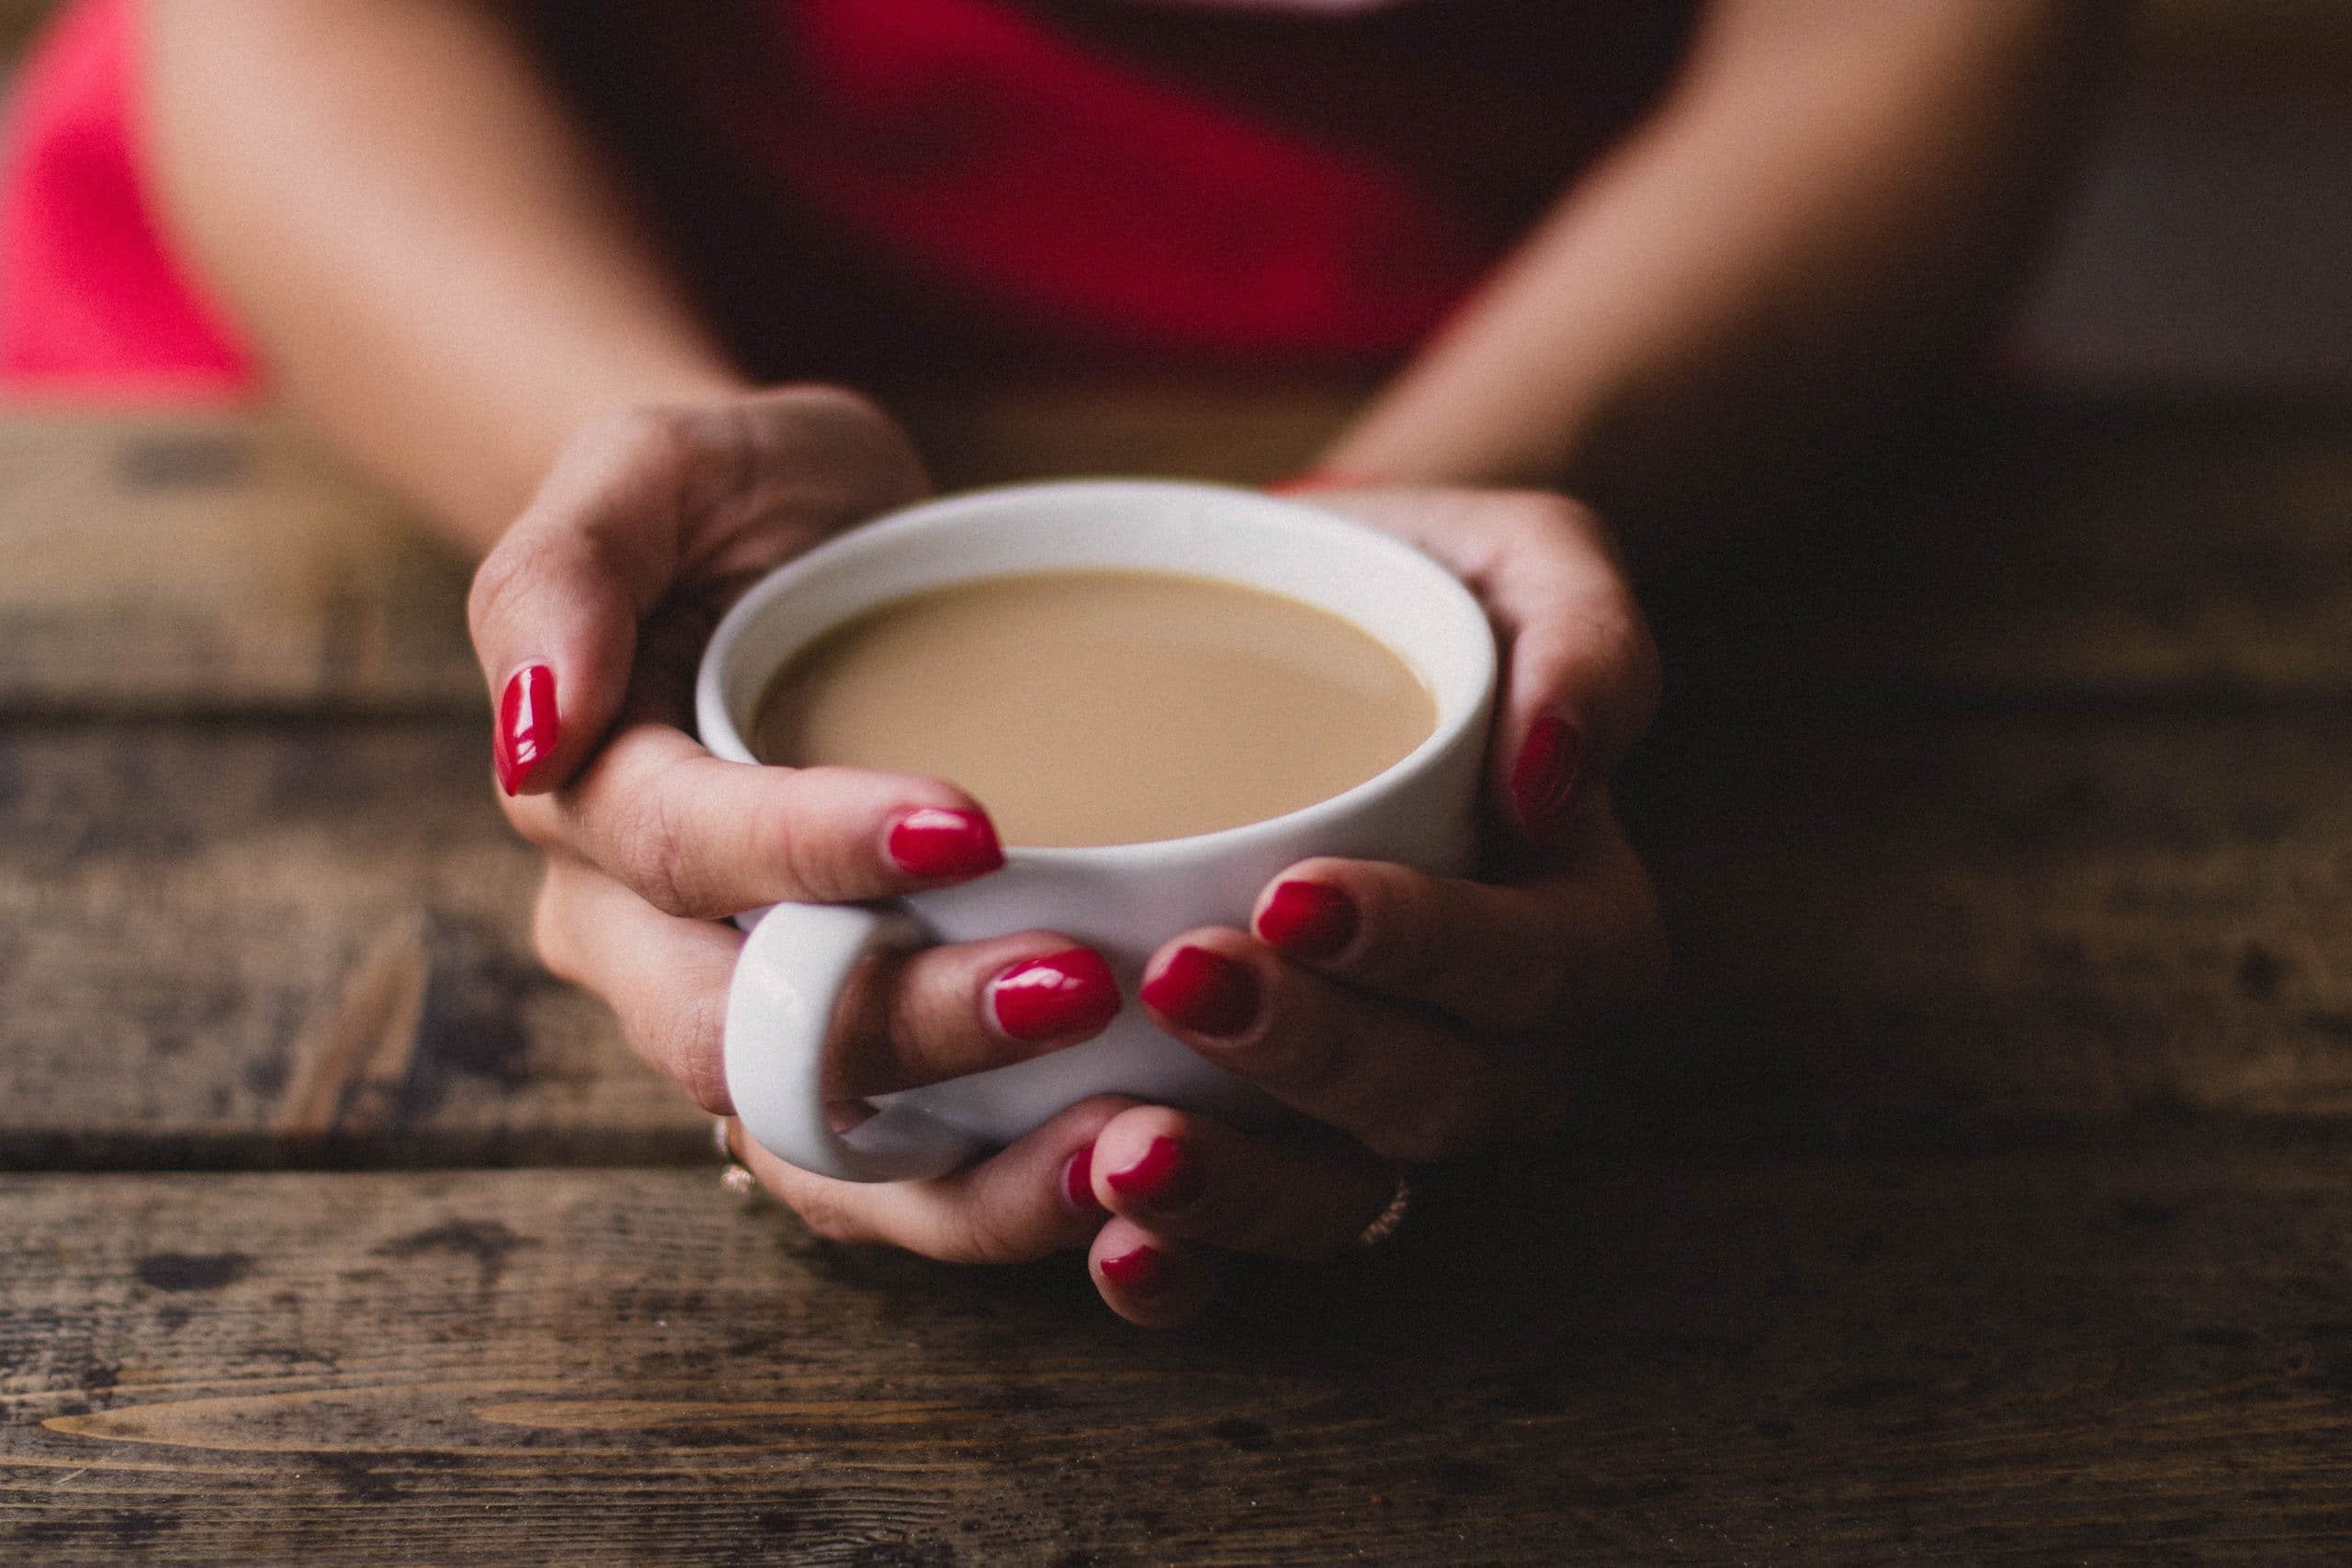 close-up of a woman's hands wrapped around a cup of coffee